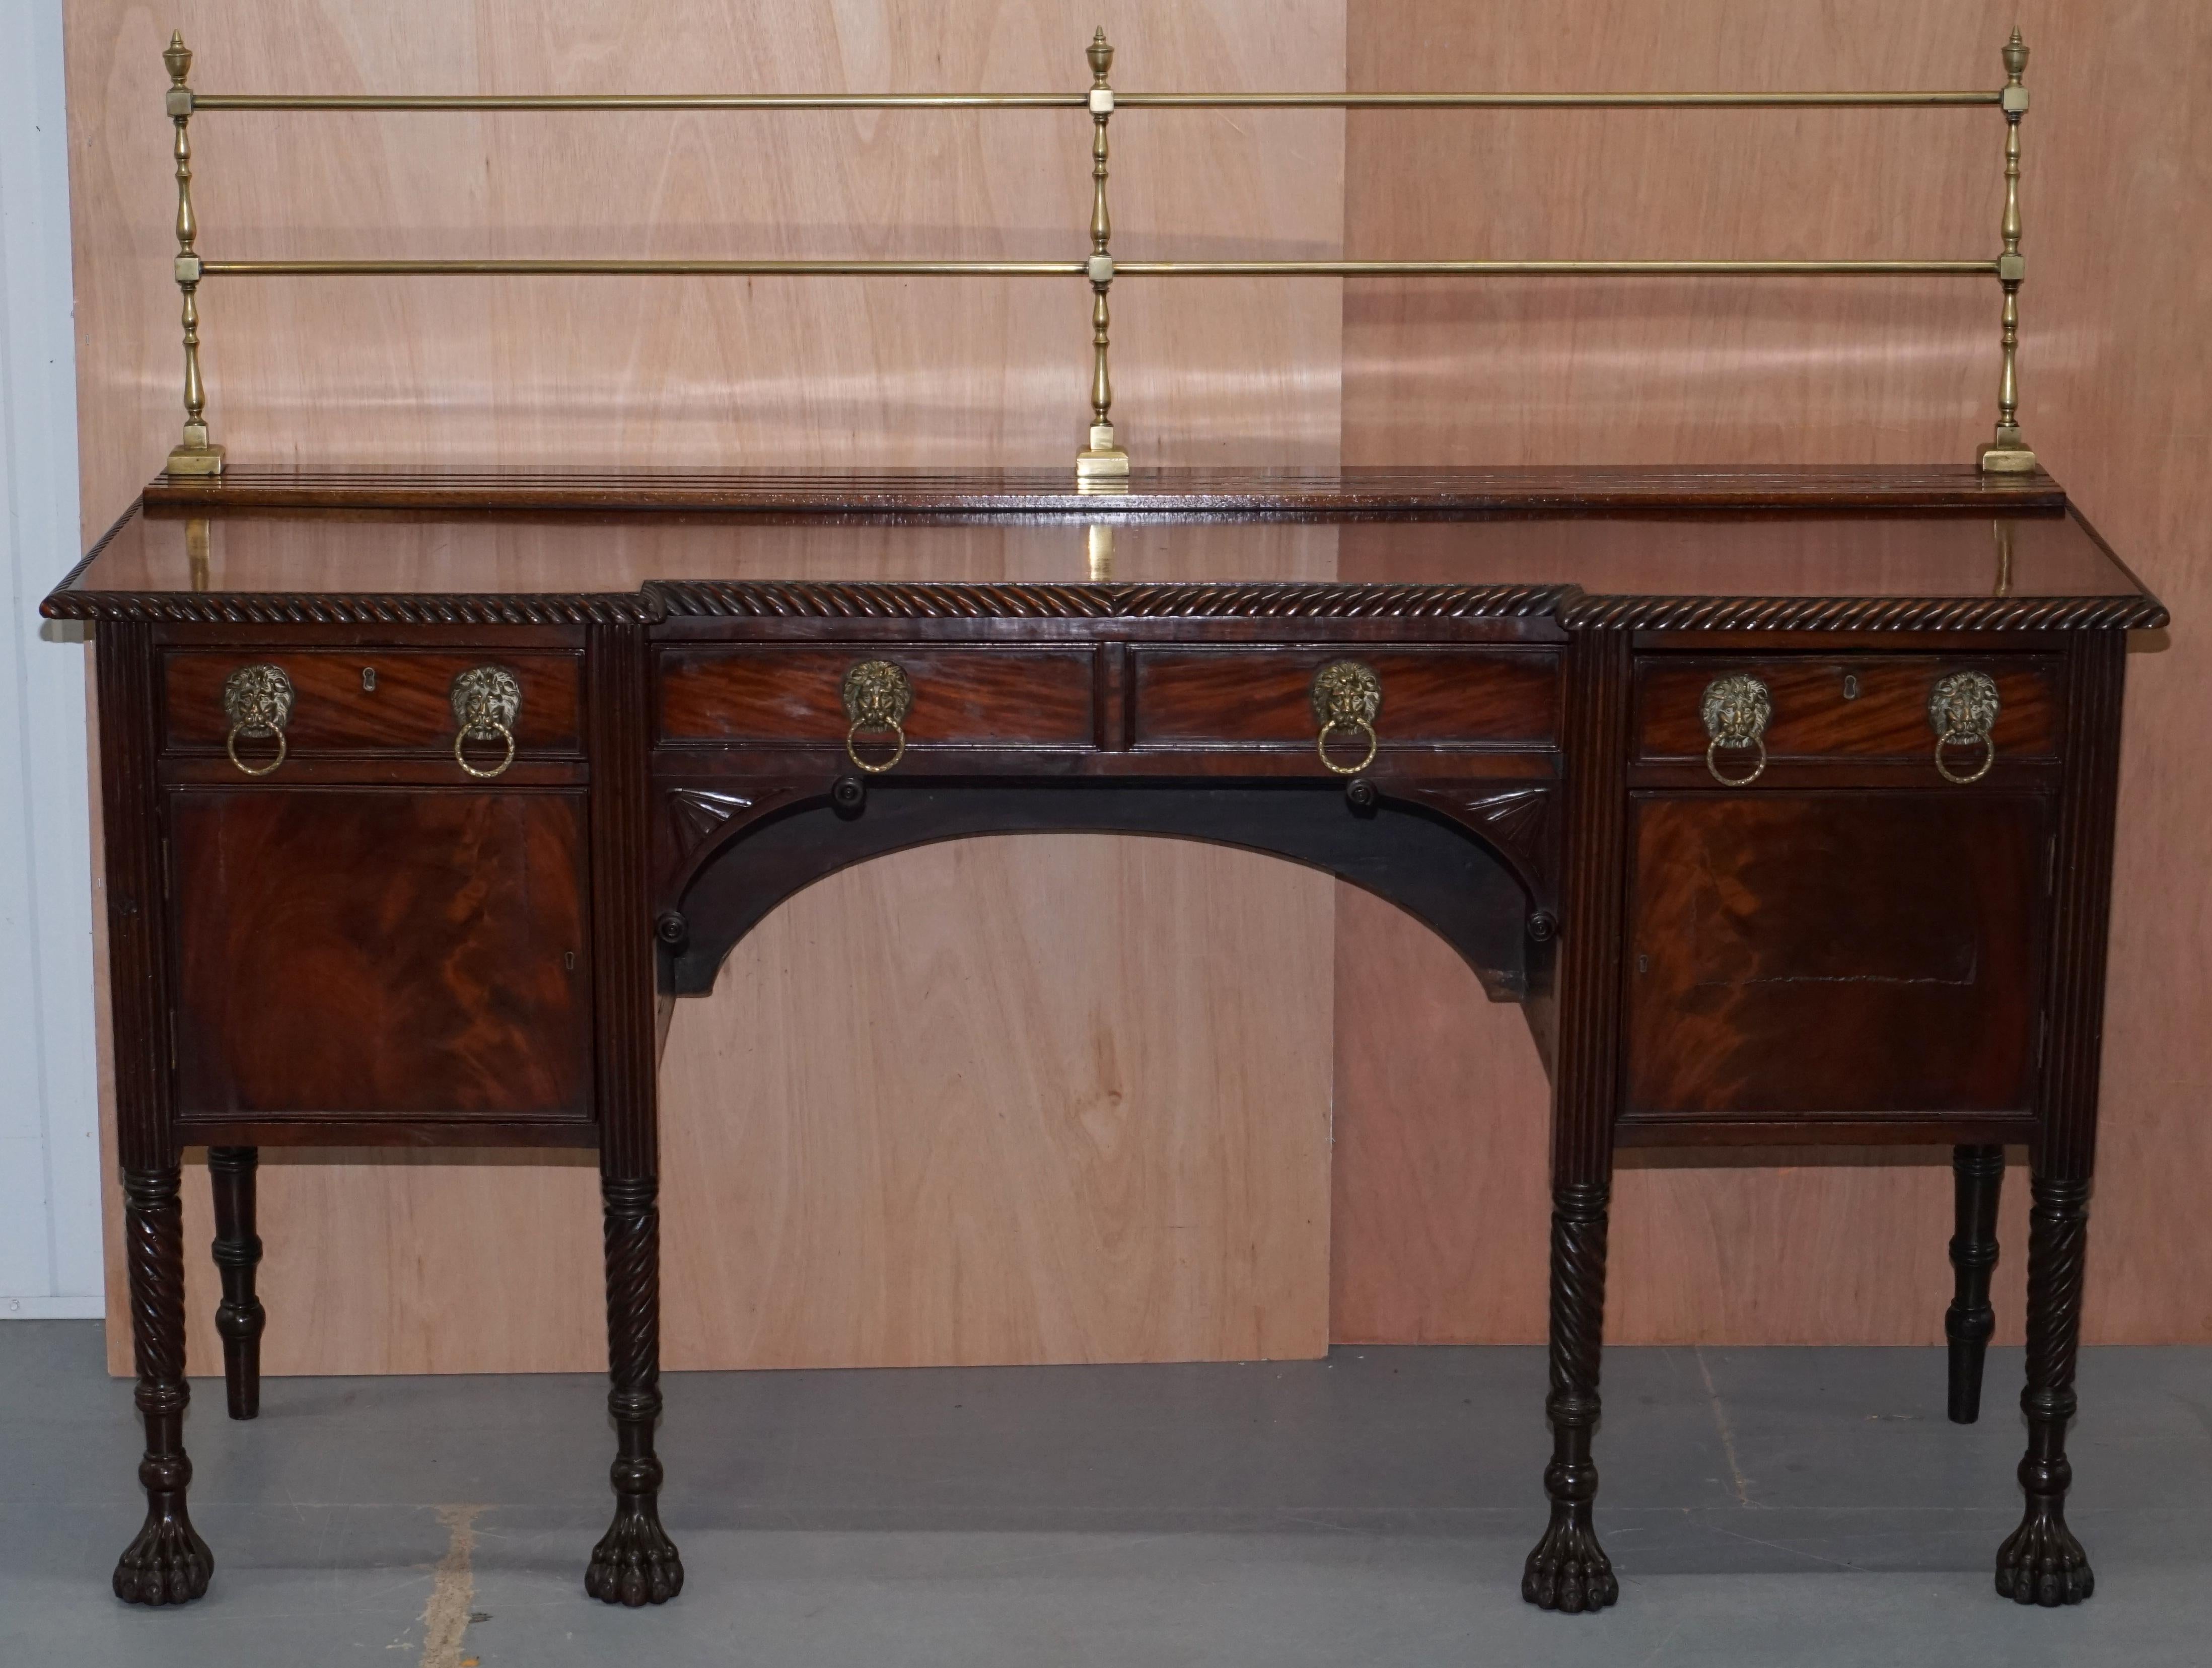 Wimbledon-Furniture

Wimbledon-Furniture is delighted to offer for sale this rare original Georgian Irish 1790 flamed mahogany sideboard with brass gallery

Please note the delivery fee listed is just a guide, it covers within the M25 only, for